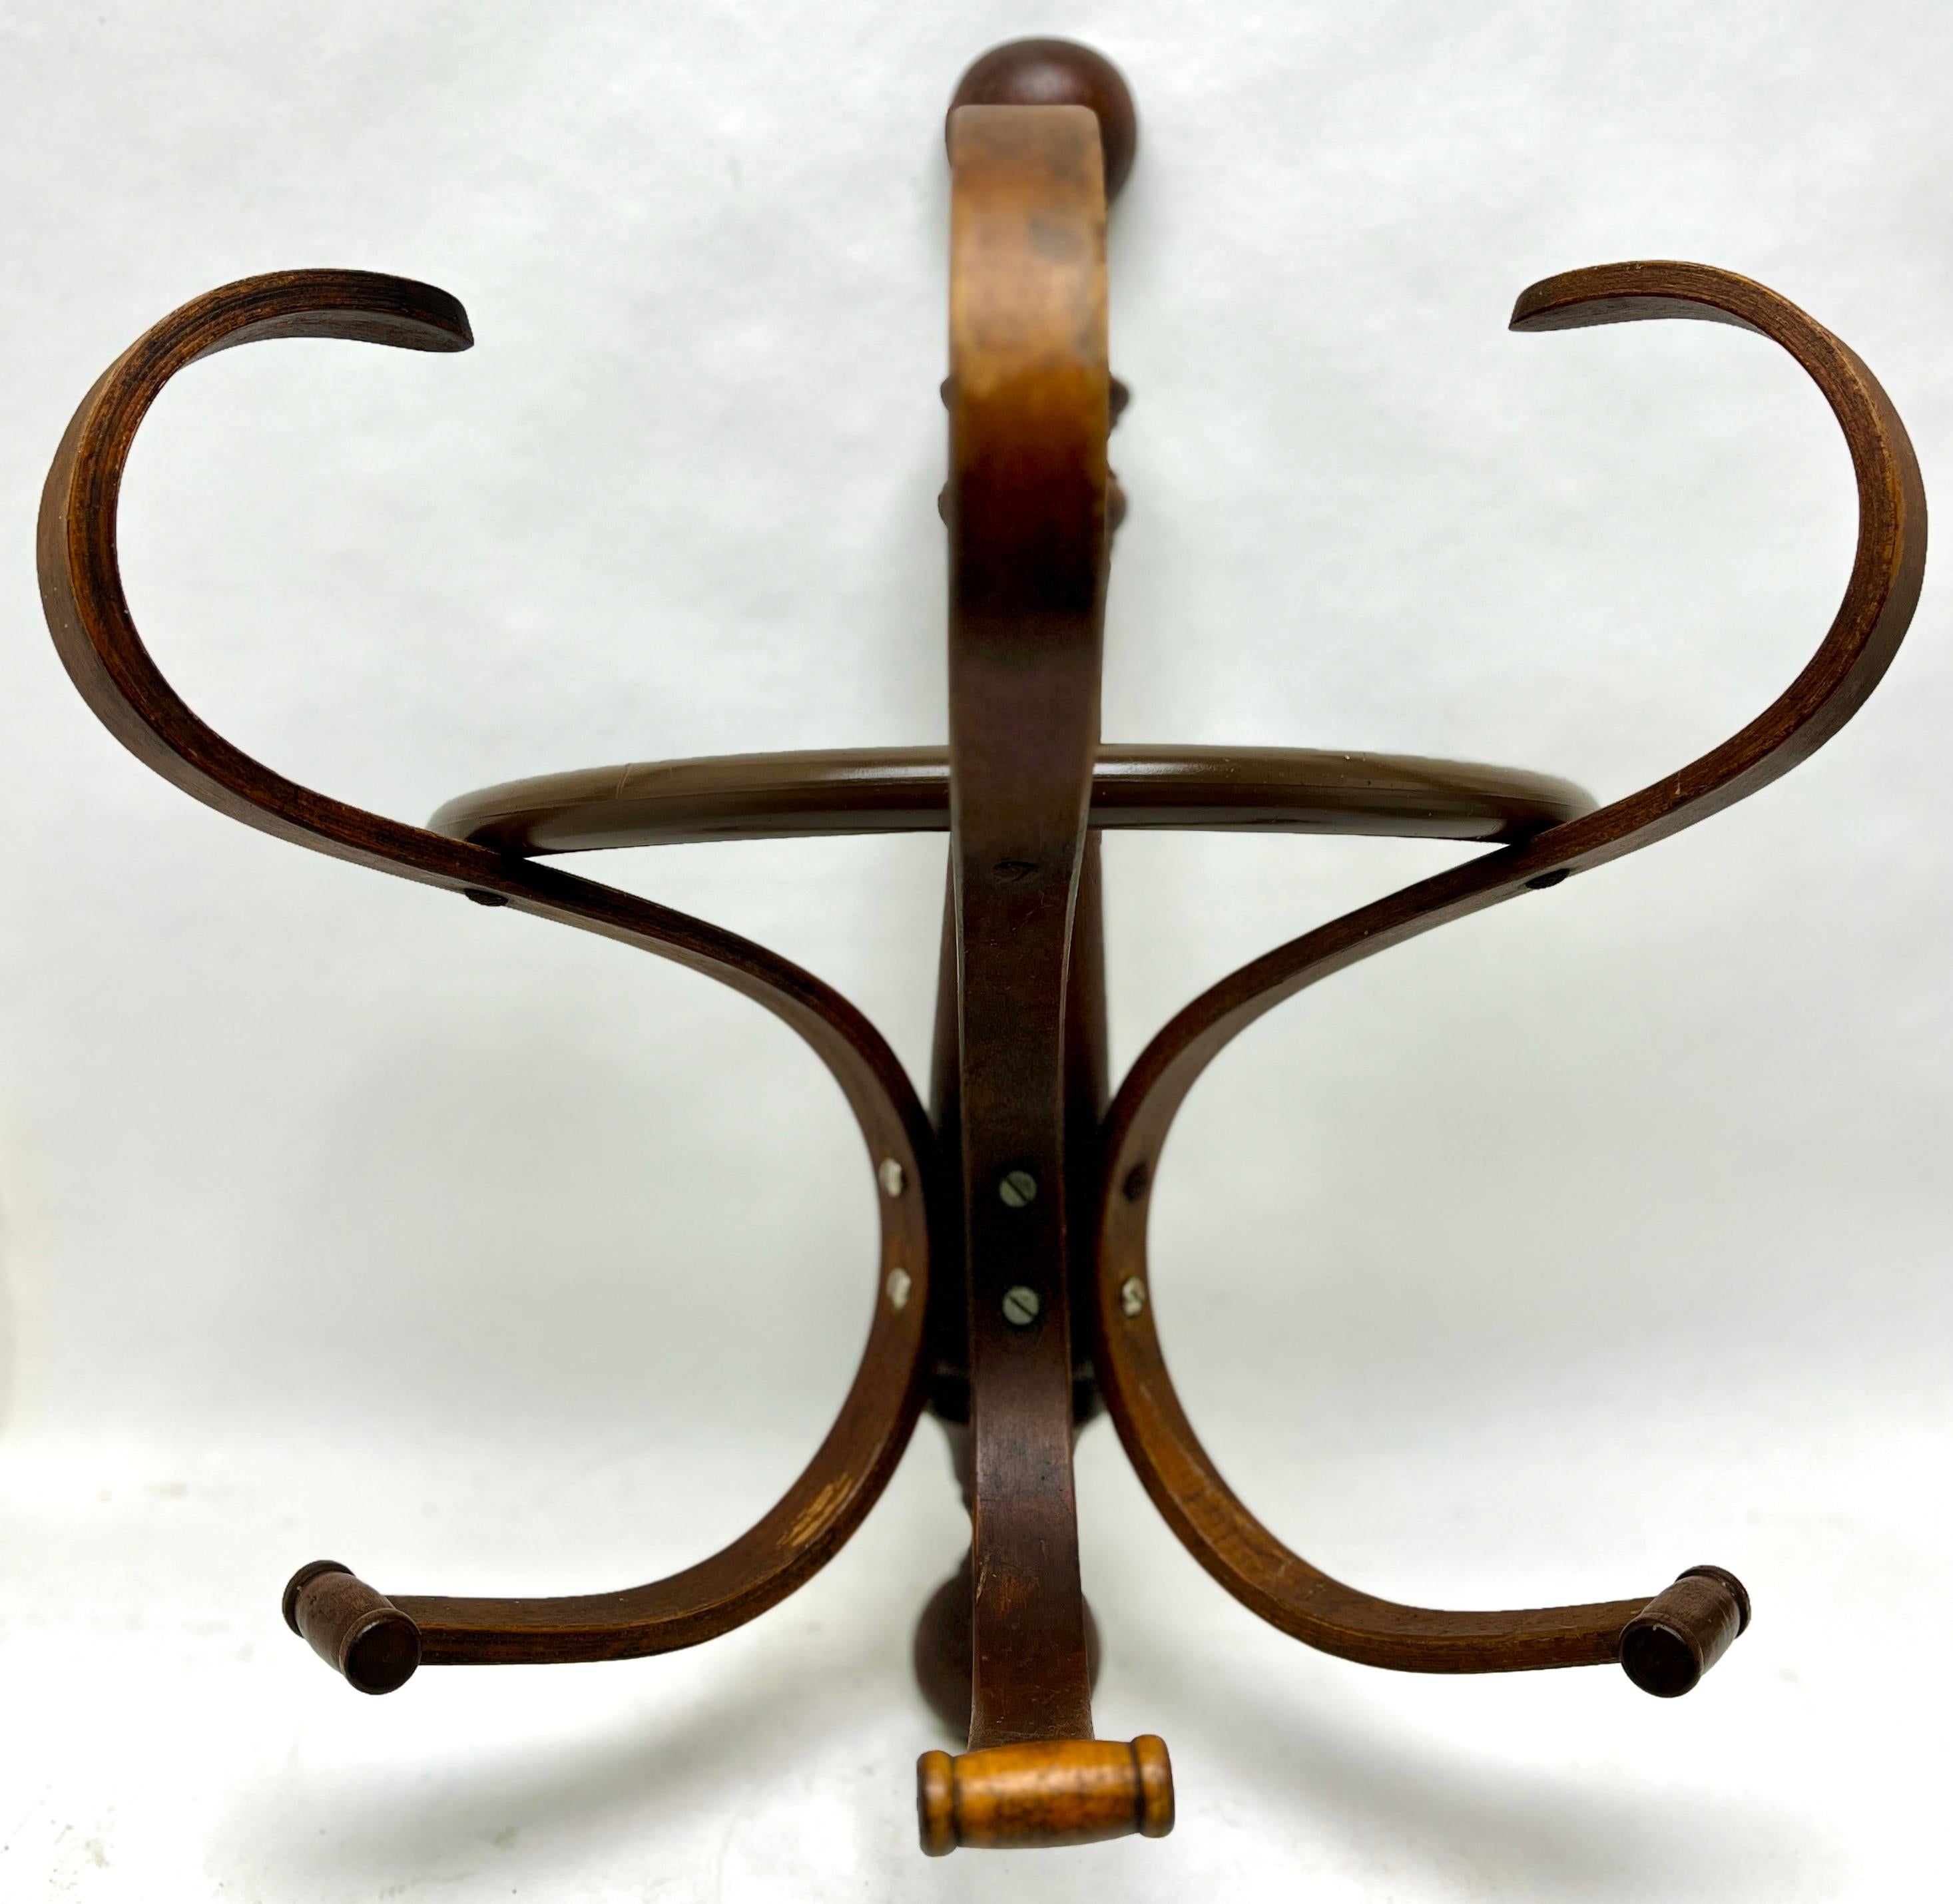 Art Nouveau Bentwood Wall Coat Rack Attributed to Thonet, Vienna, 1910s 3